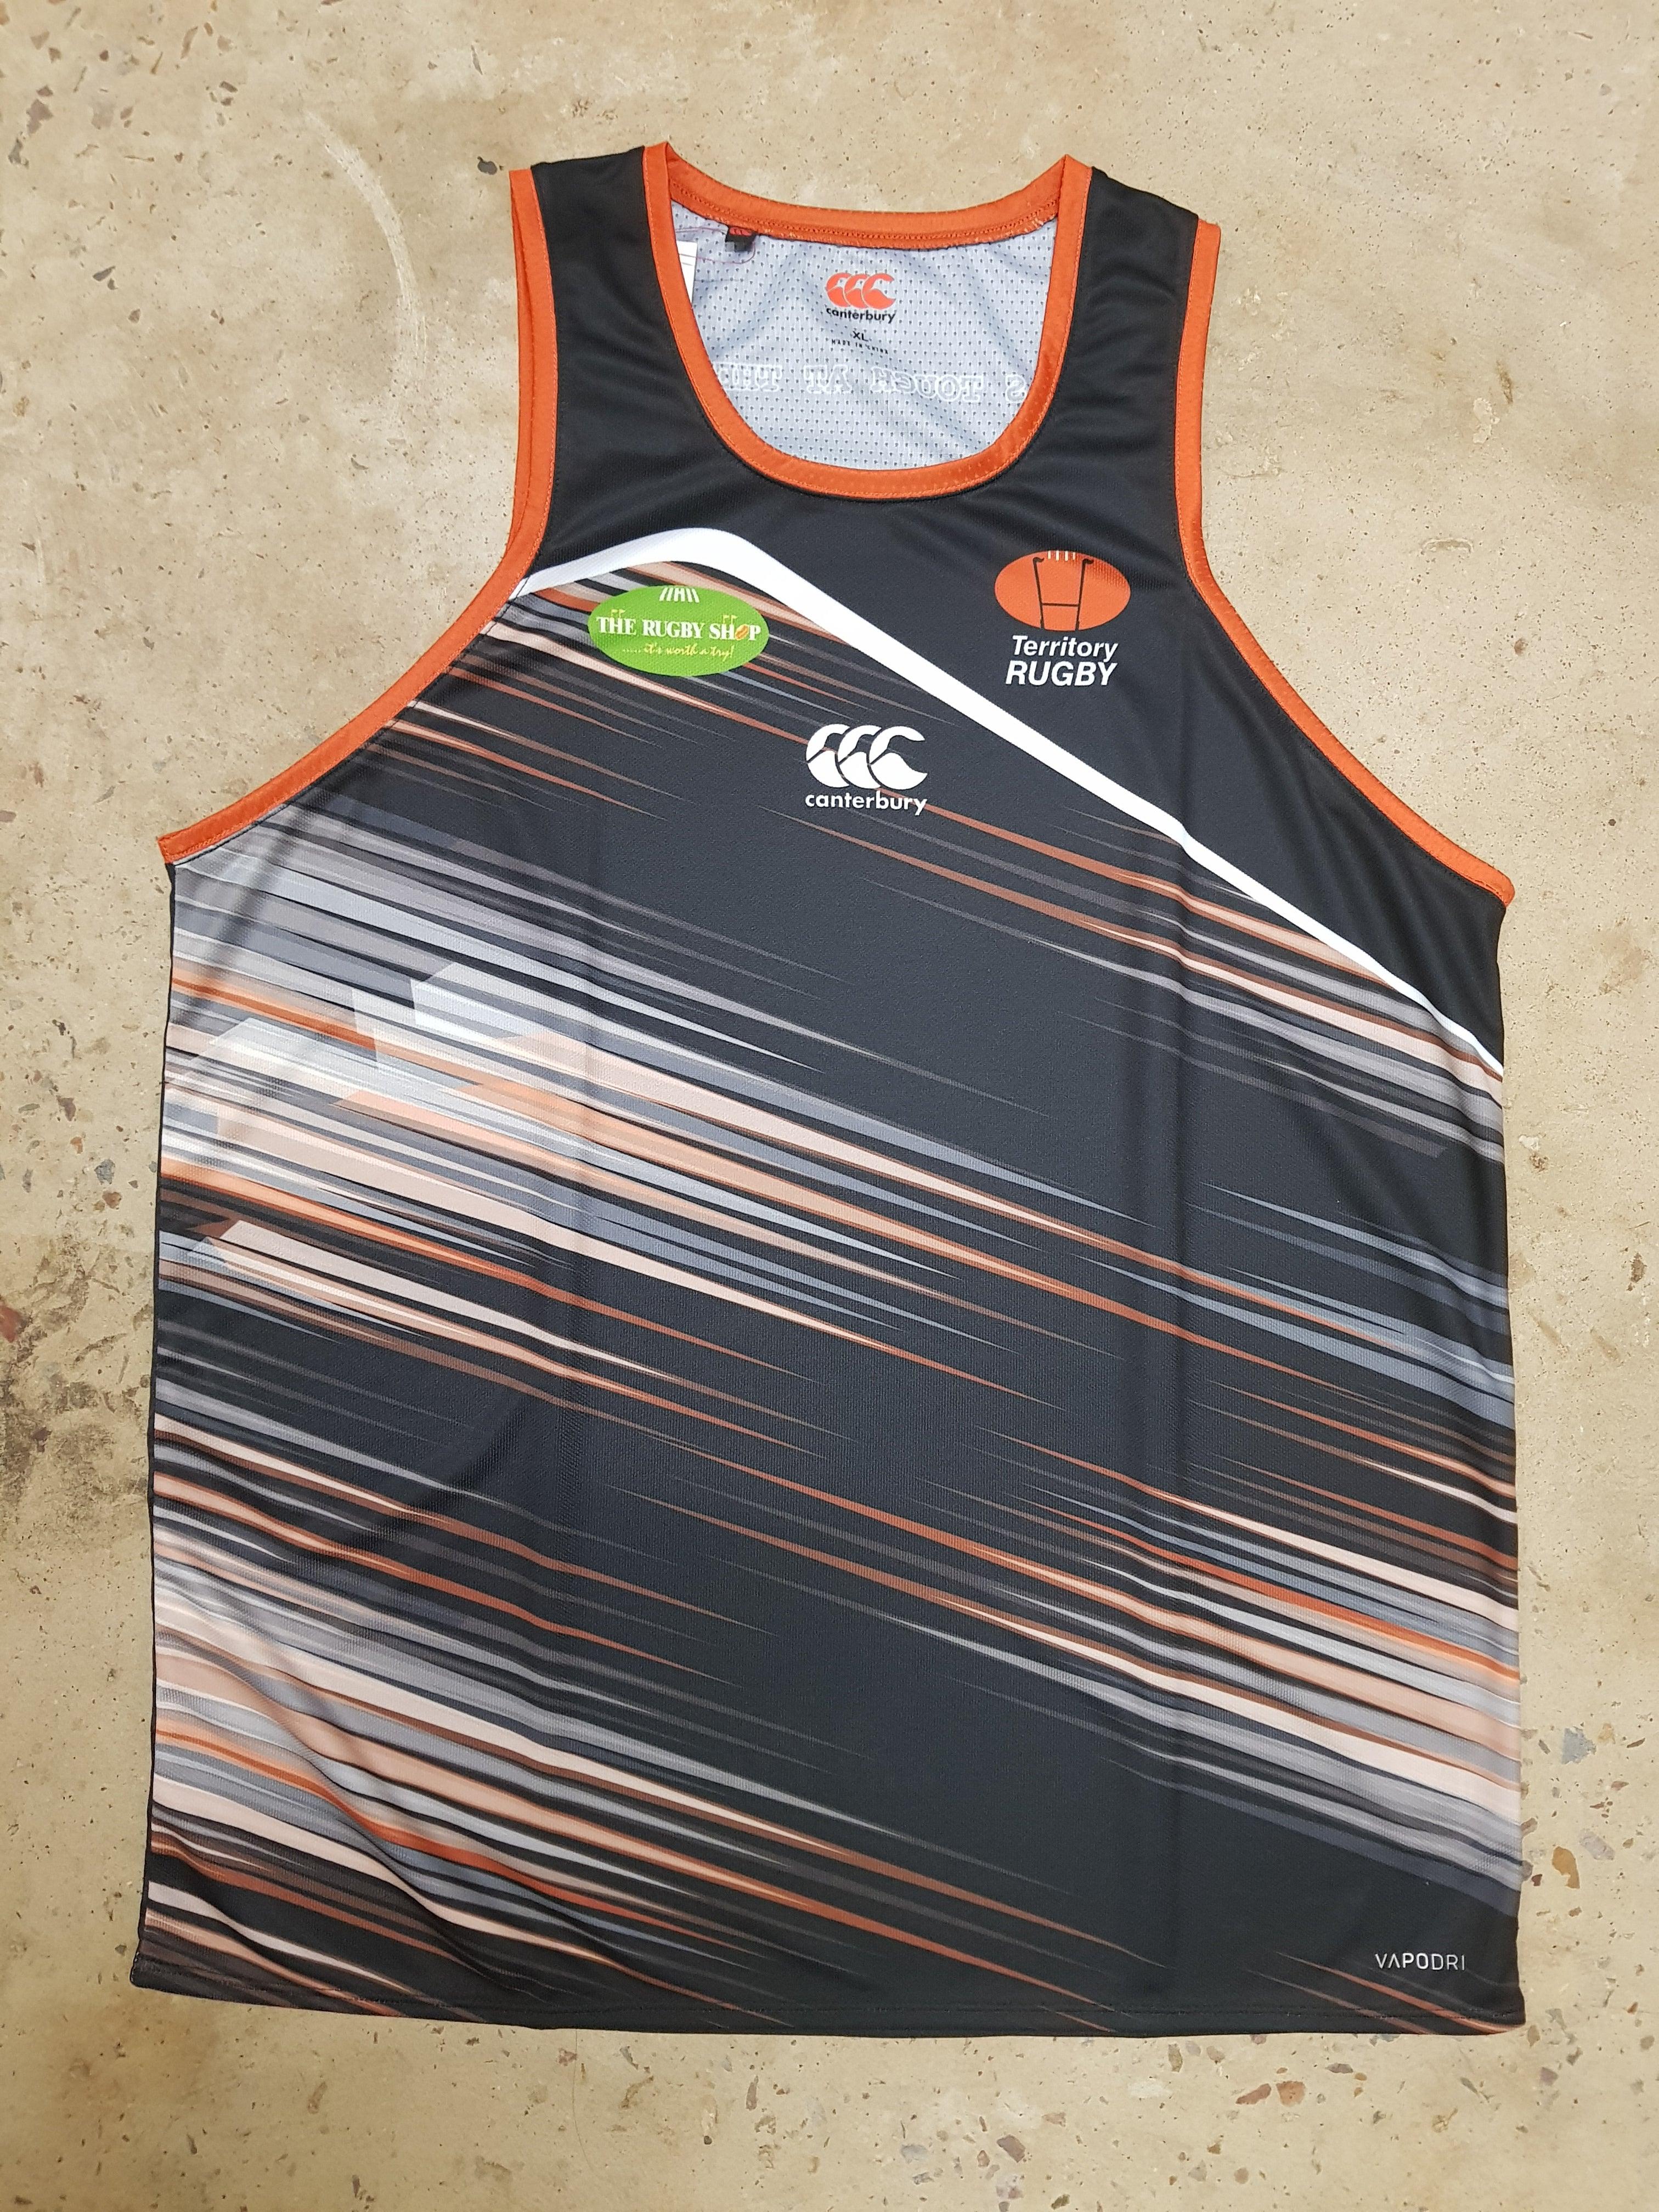 Territory Rugby Singlet - The Rugby Shop Darwin